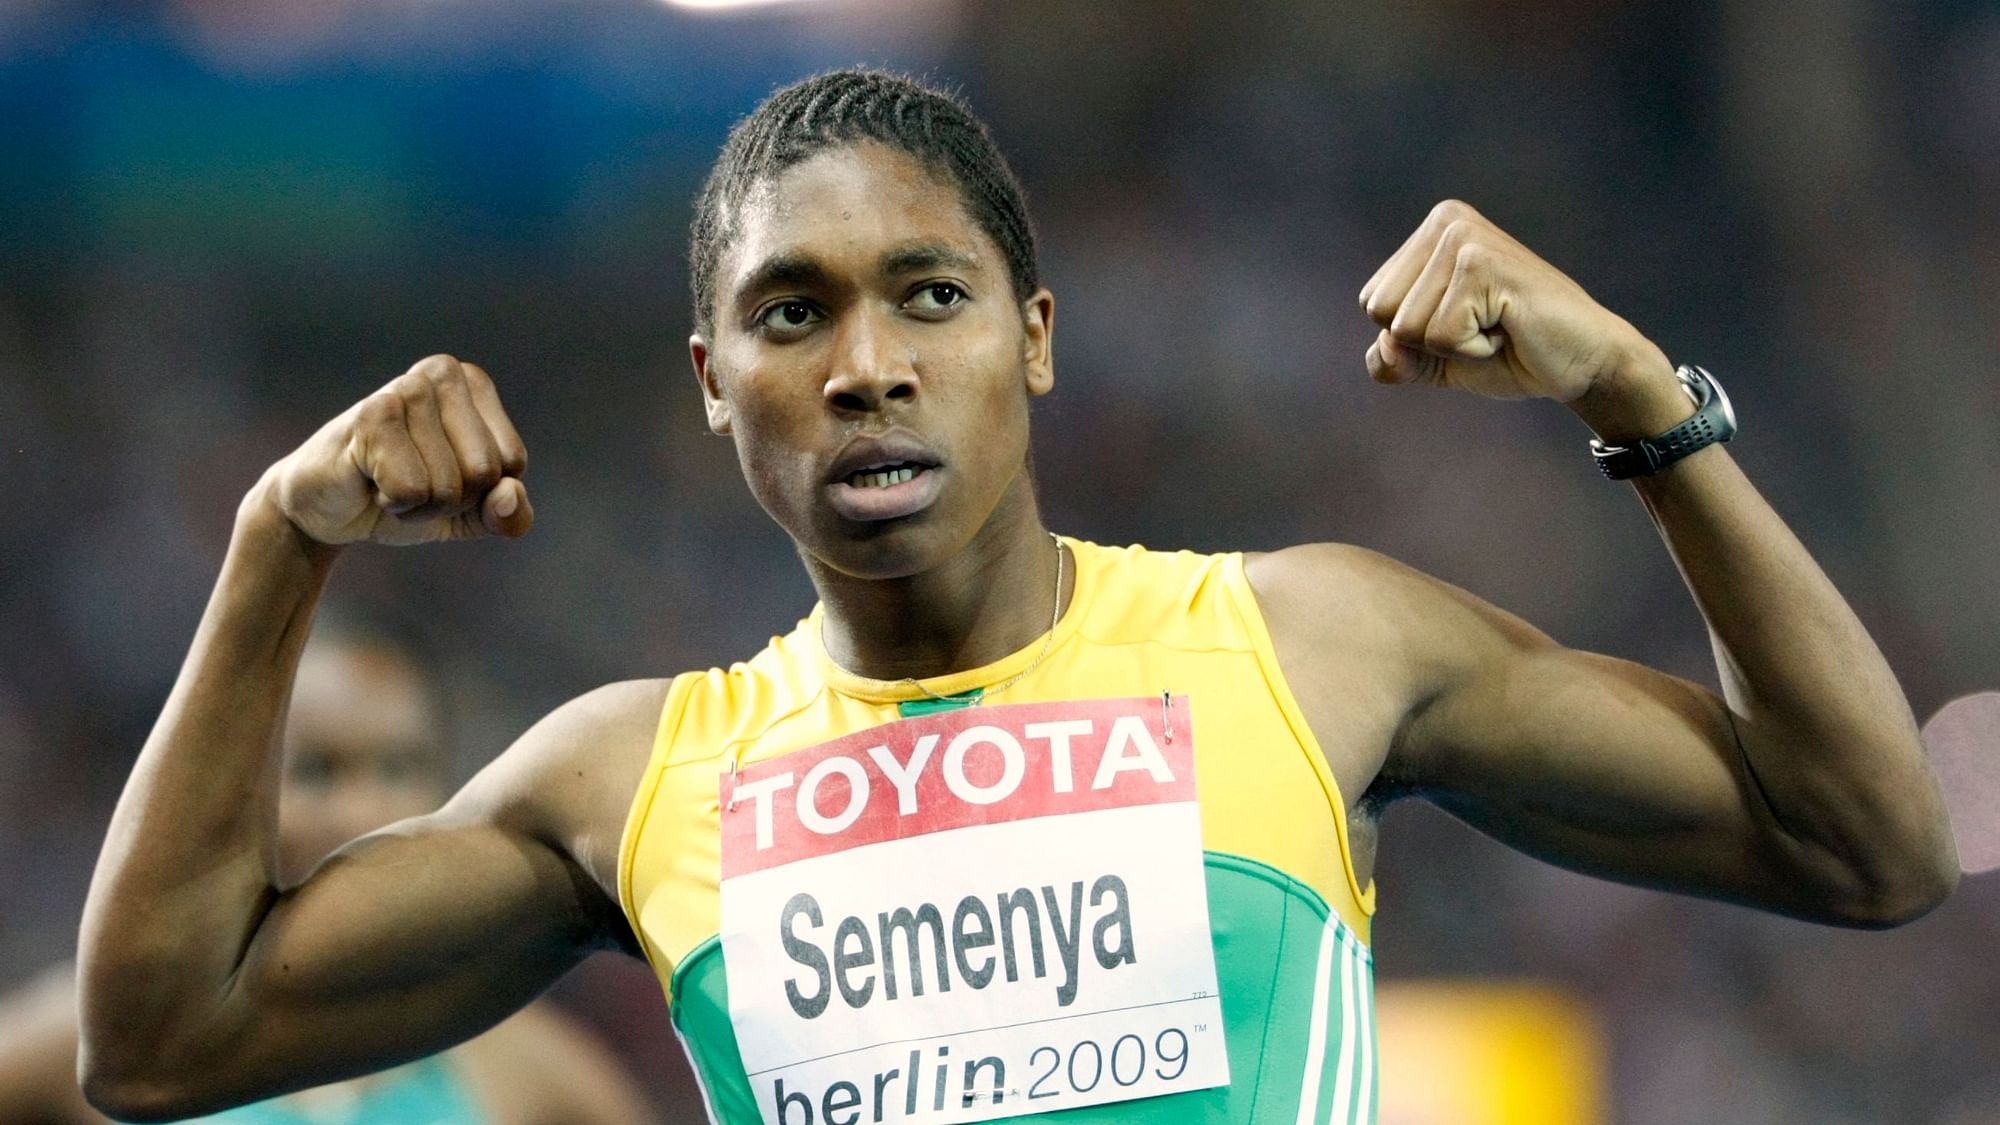 Caster Semenya has lost her appeal against new rules that force her to medicate to suppress her testosterone levels.